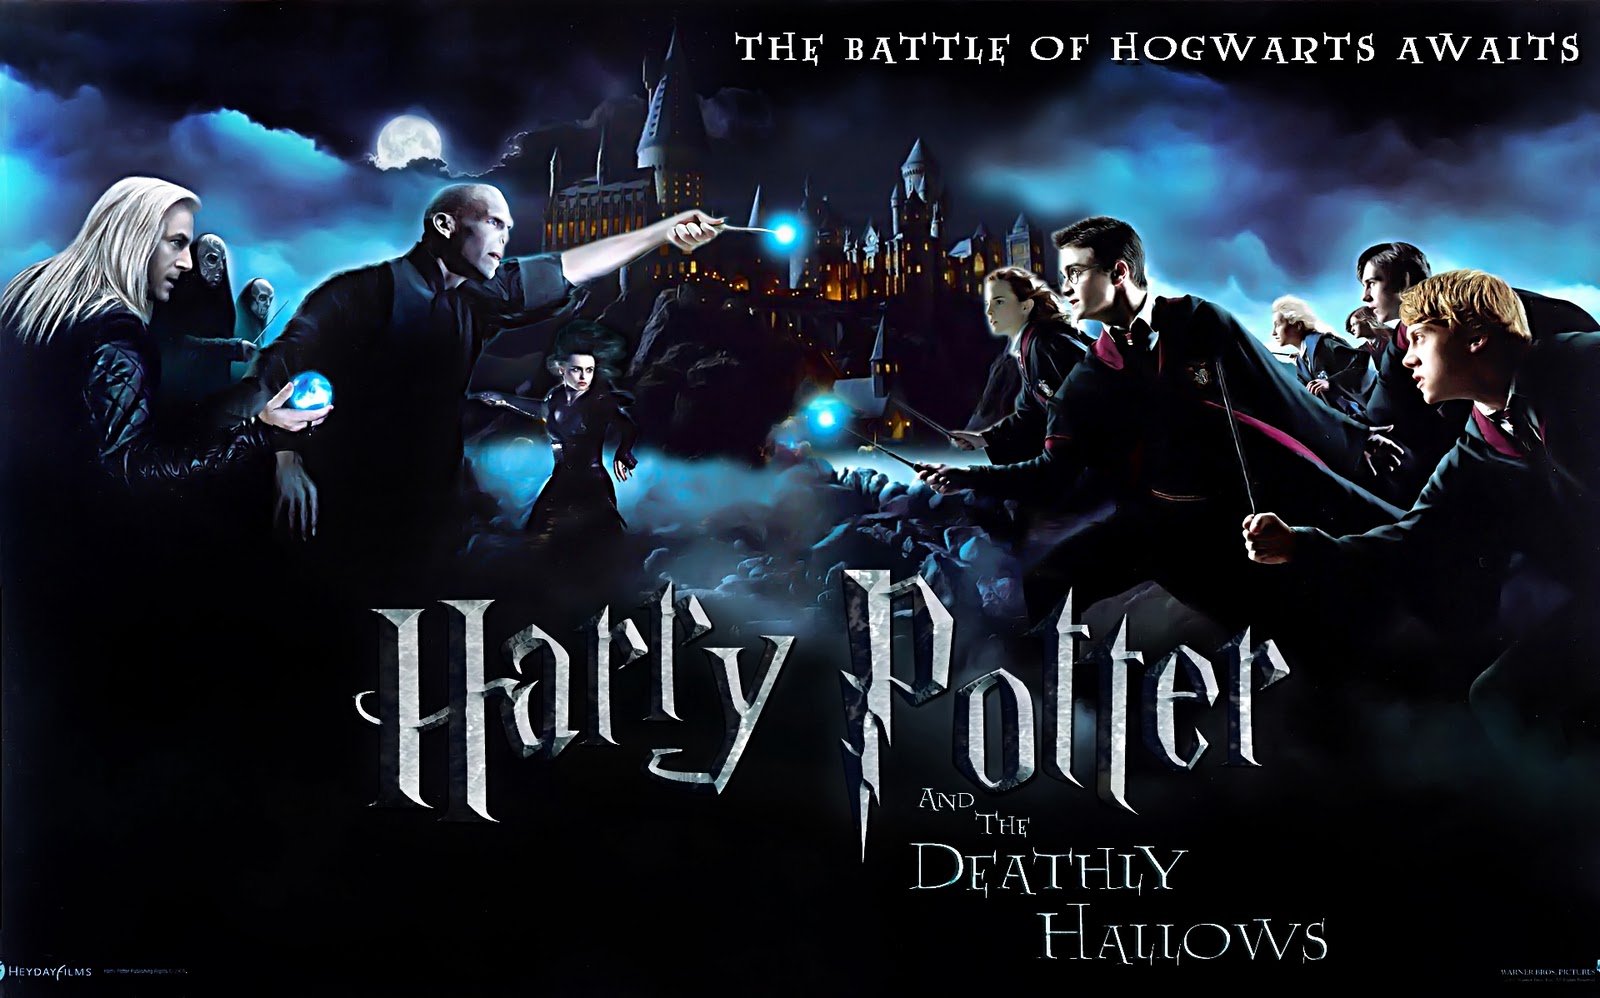 Wallpaper Harry Potter And The Deathly Hallows